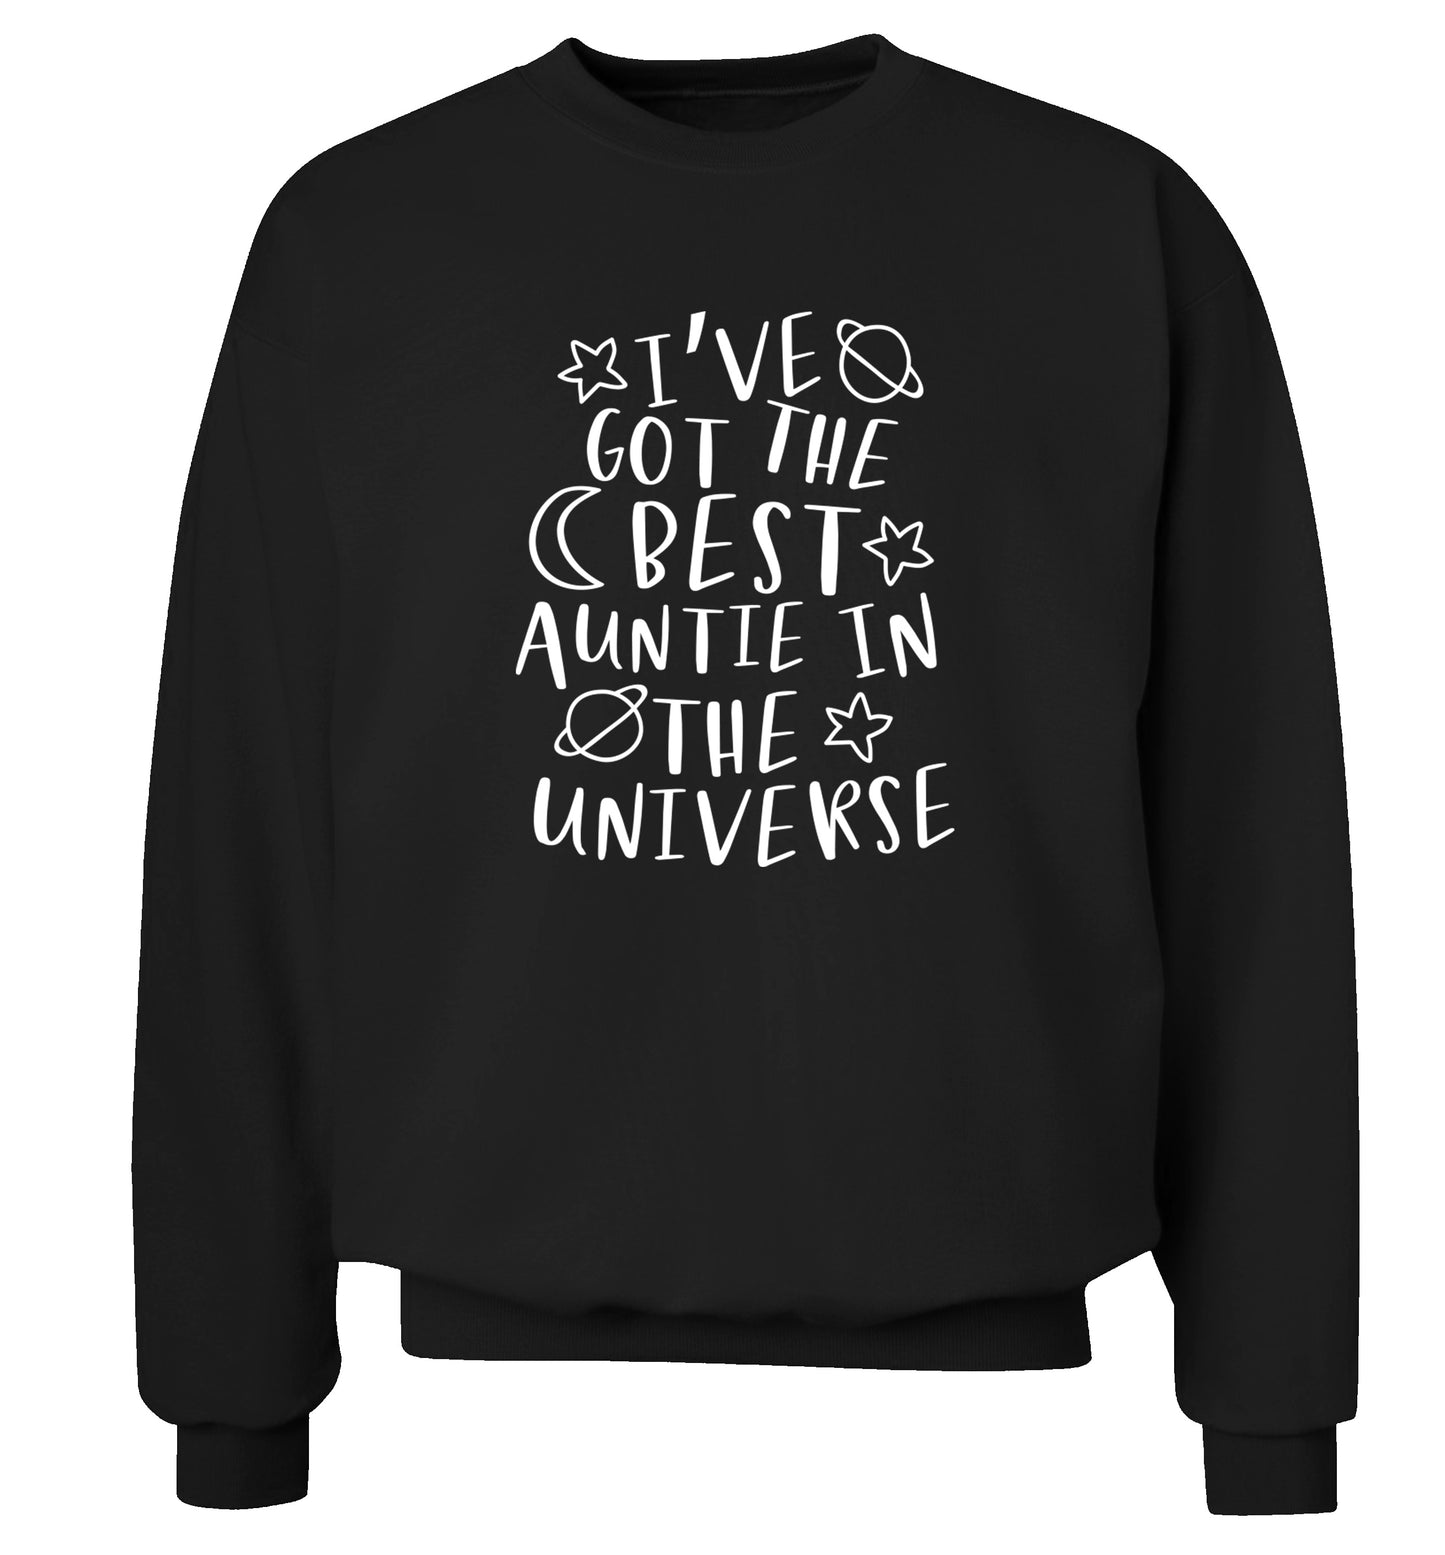 I've got the best auntie in the universe Adult's unisex black Sweater 2XL